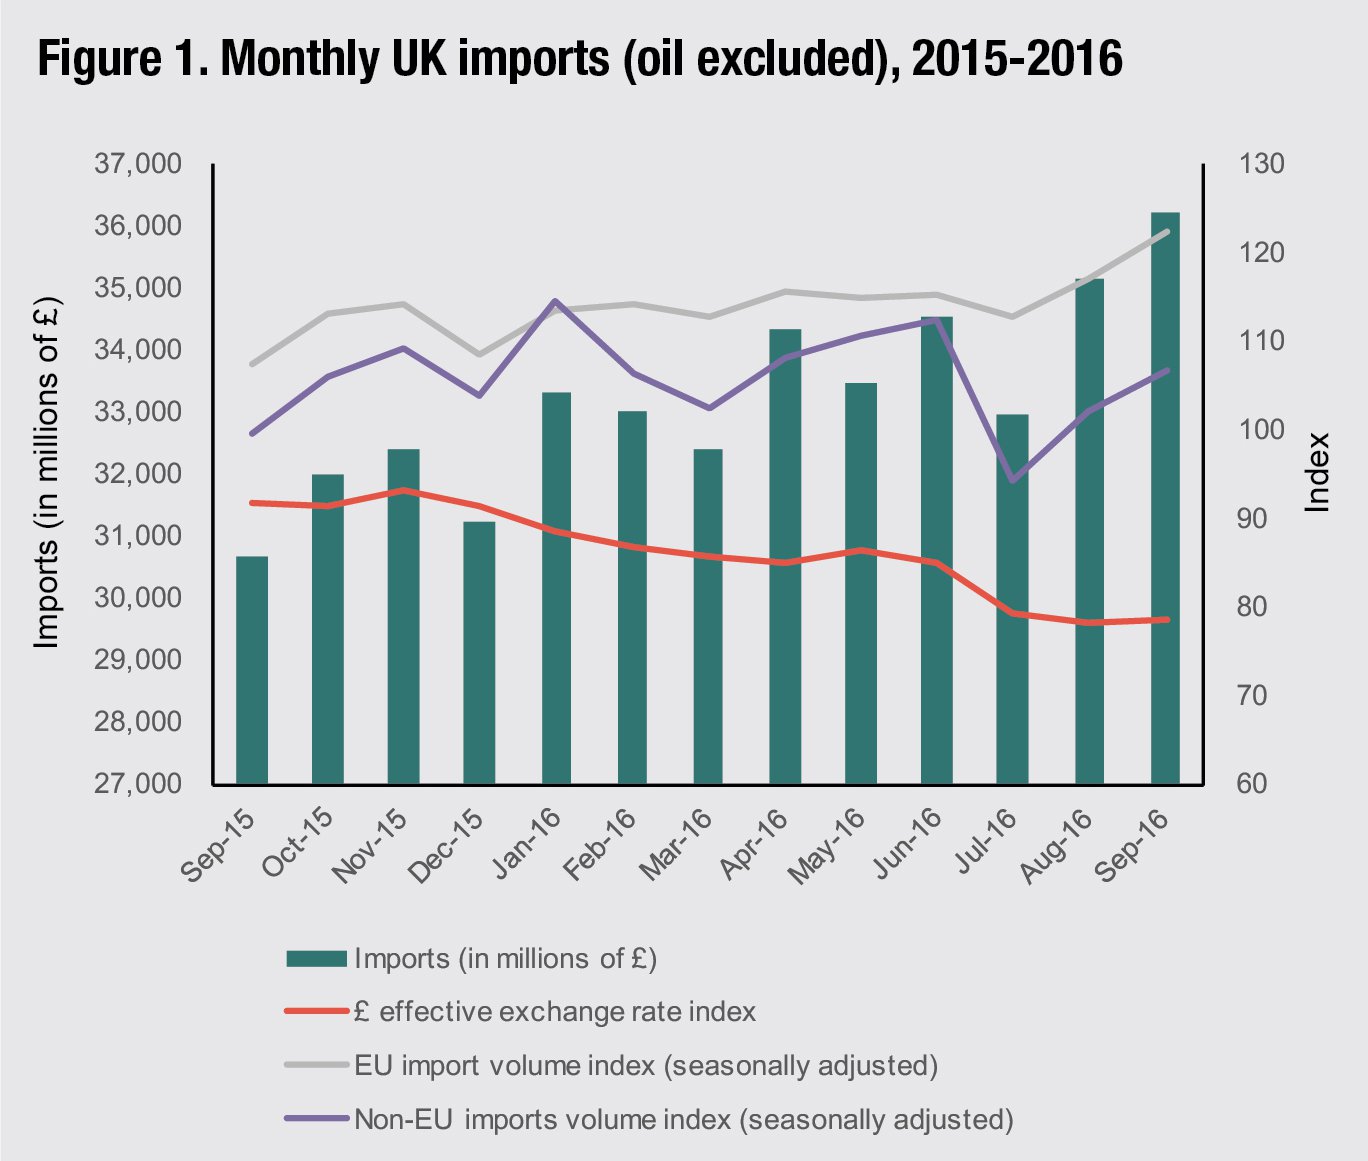 Figure 1. Monthly UK imports (oil excluded), 2015-2016. Source: ONS Note: £ effective exchange rate index base 2015=100. EU and Non-EU imports volume seasonally adjusted index base 2013=100